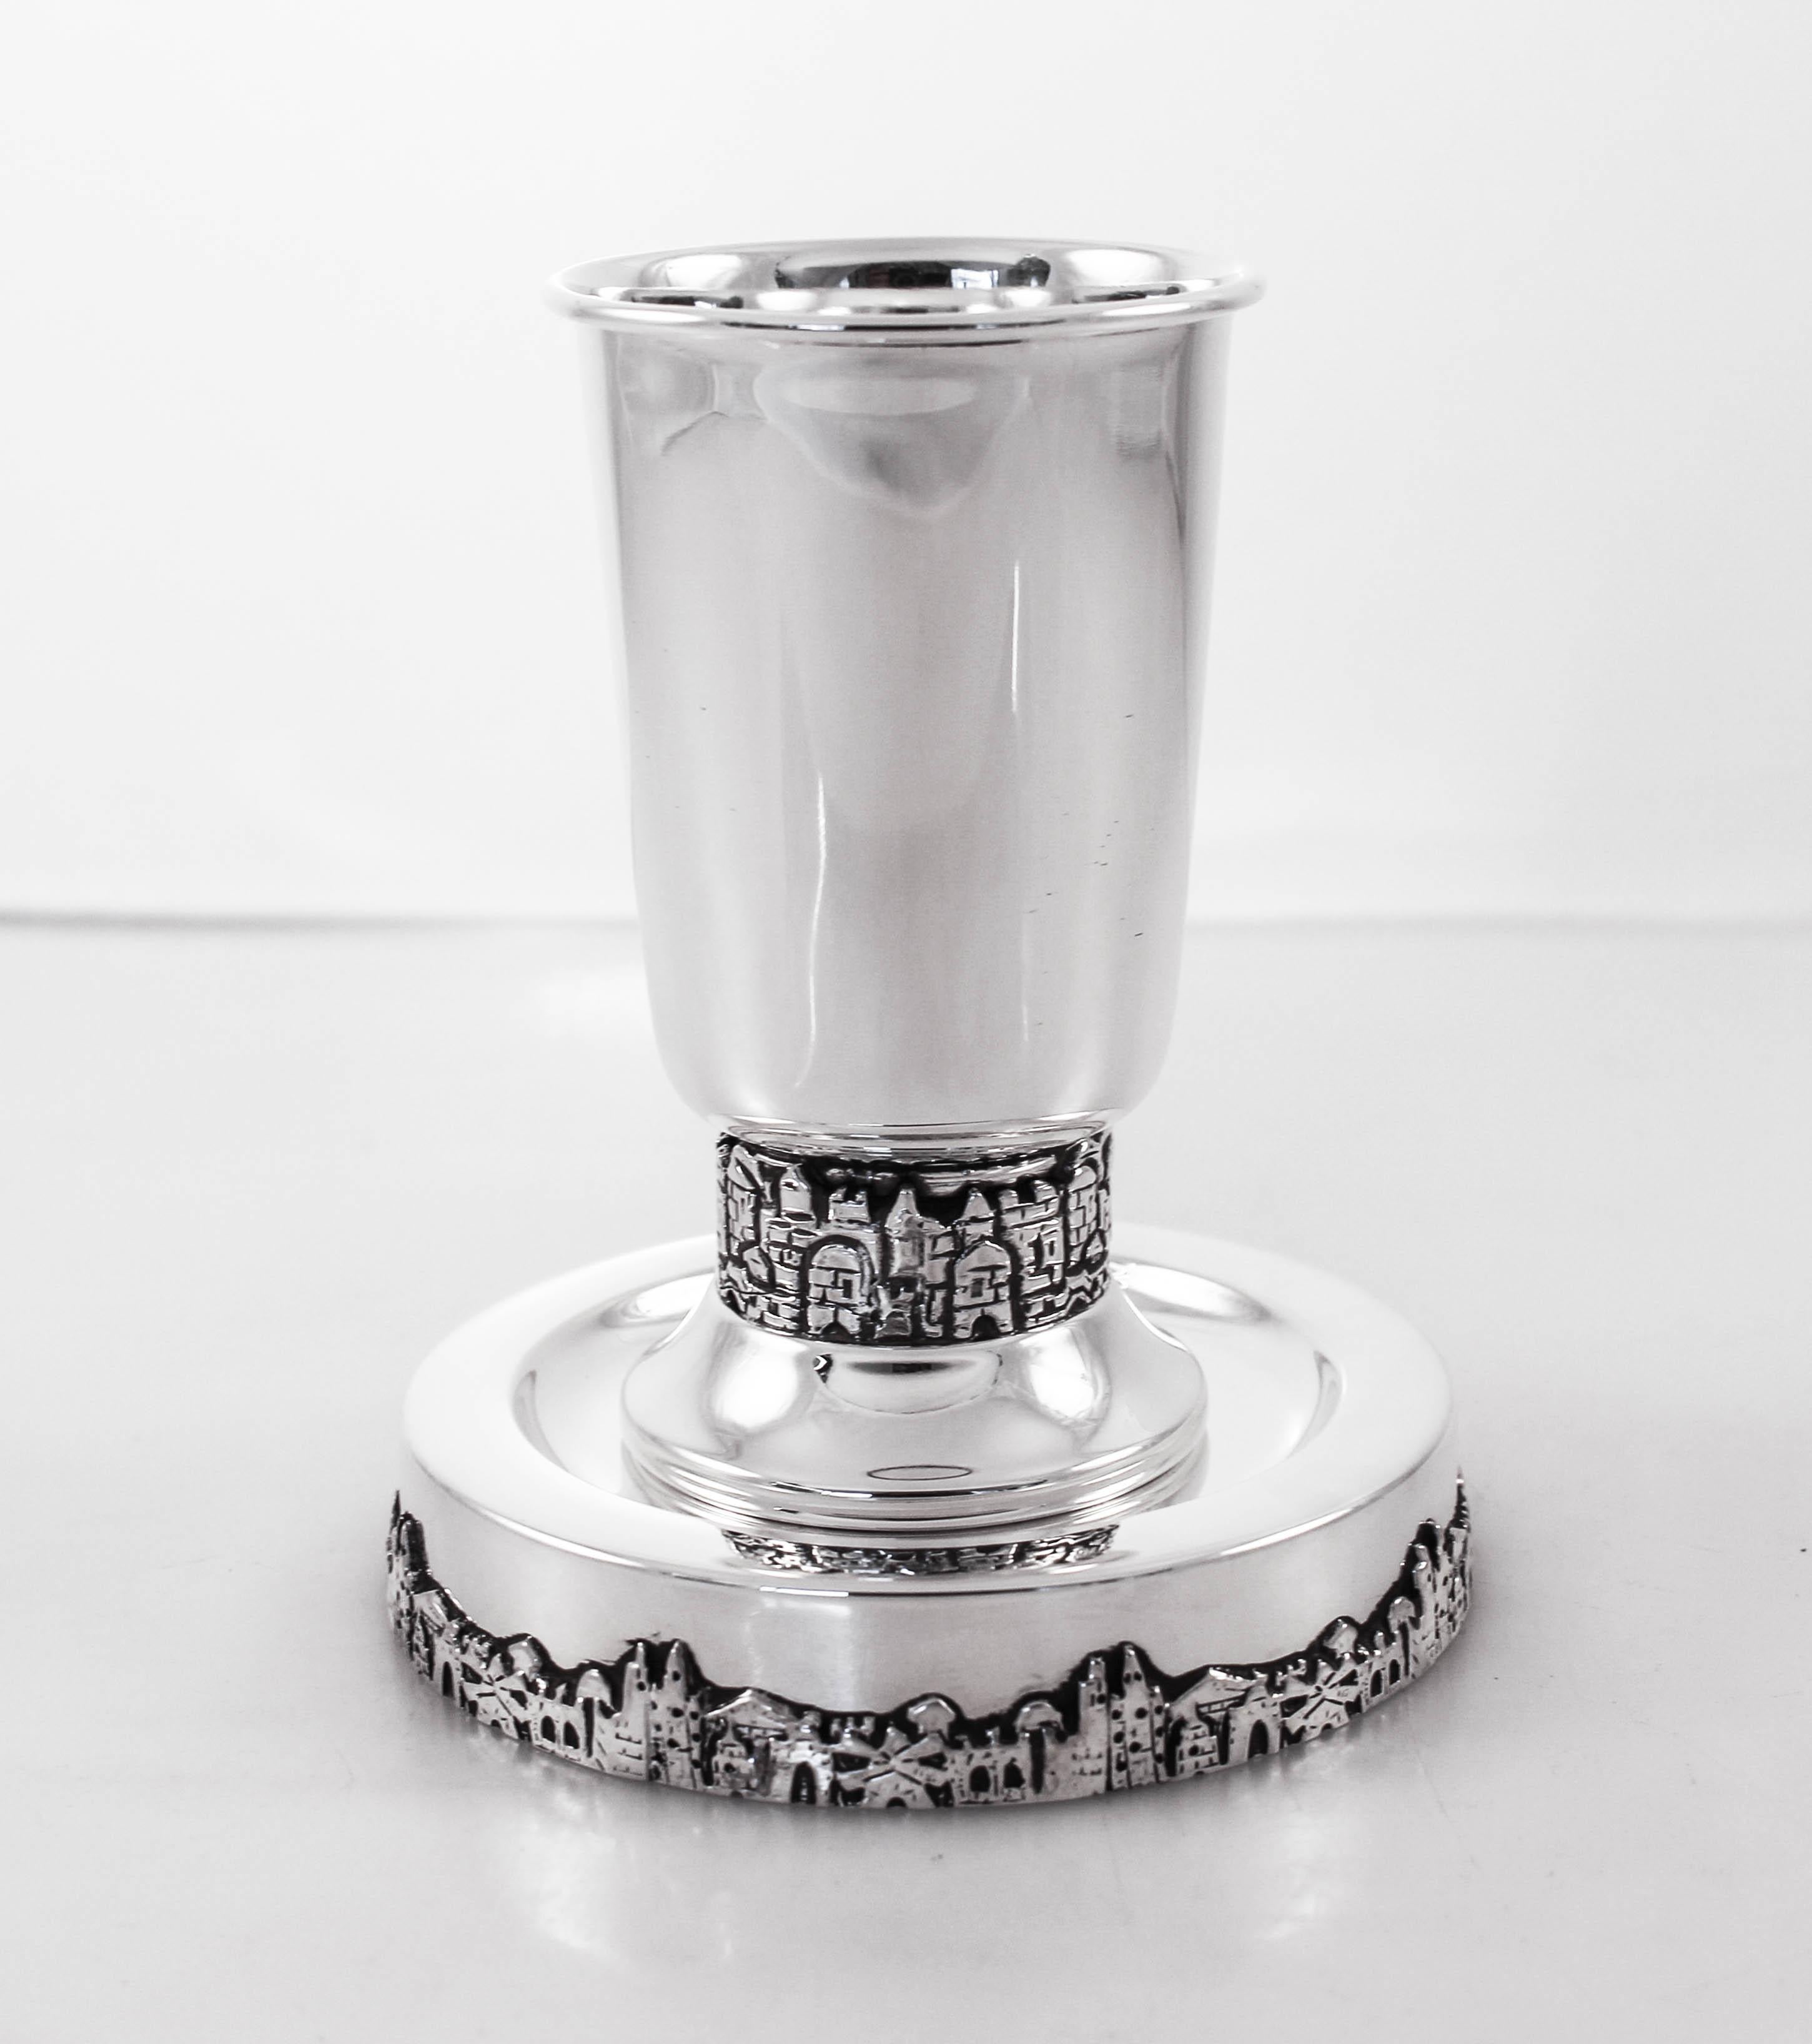 Proudly offering this sterling silver Kiddush cup and matching plate. The Jerusalem skyline decorates the base of the plate and the cup too. If you want one simple word to symbolize all of Jewish history, that word would be ‘Jerusalem’!
Is there a